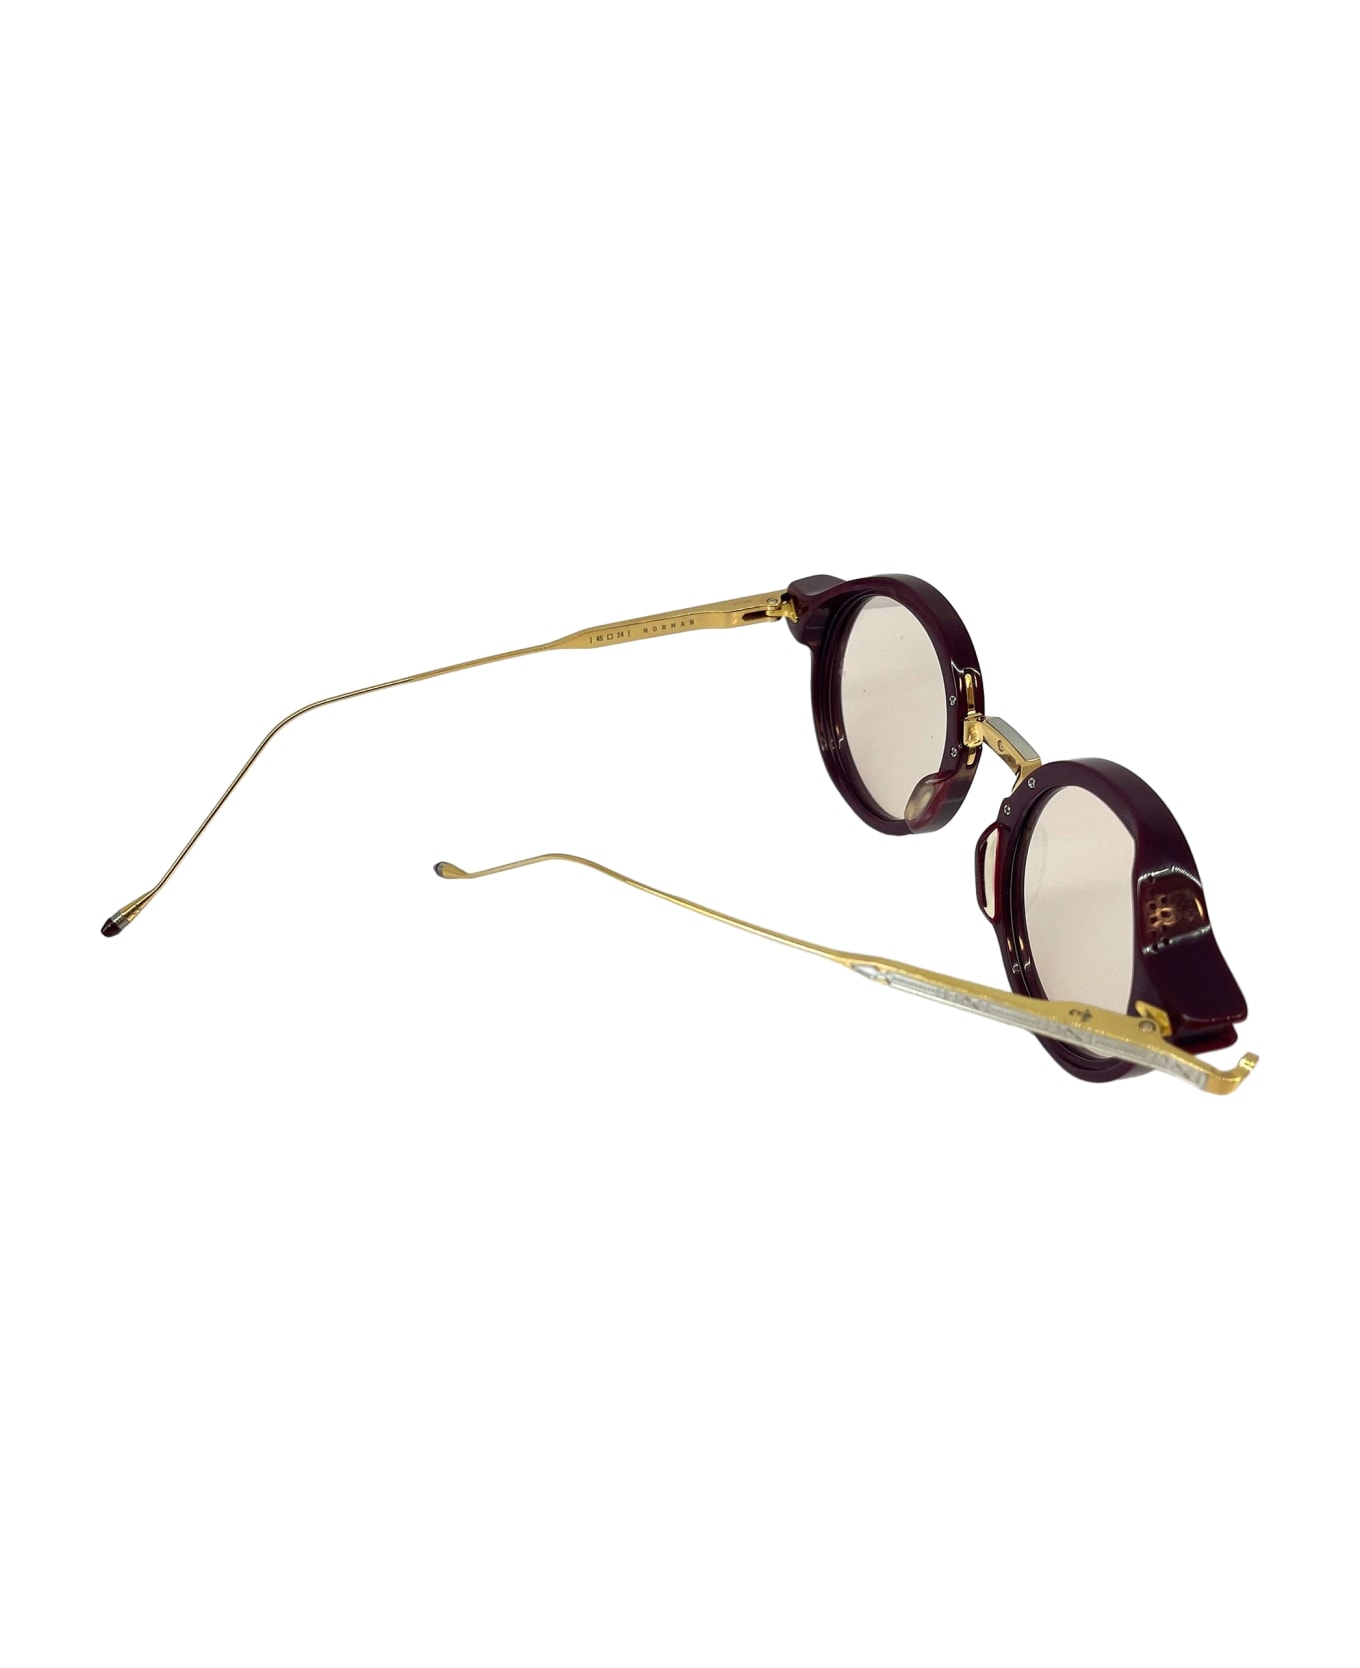 Jacques Marie Mage Norman - Reserve Rx Glasses - burgundy アイウェア